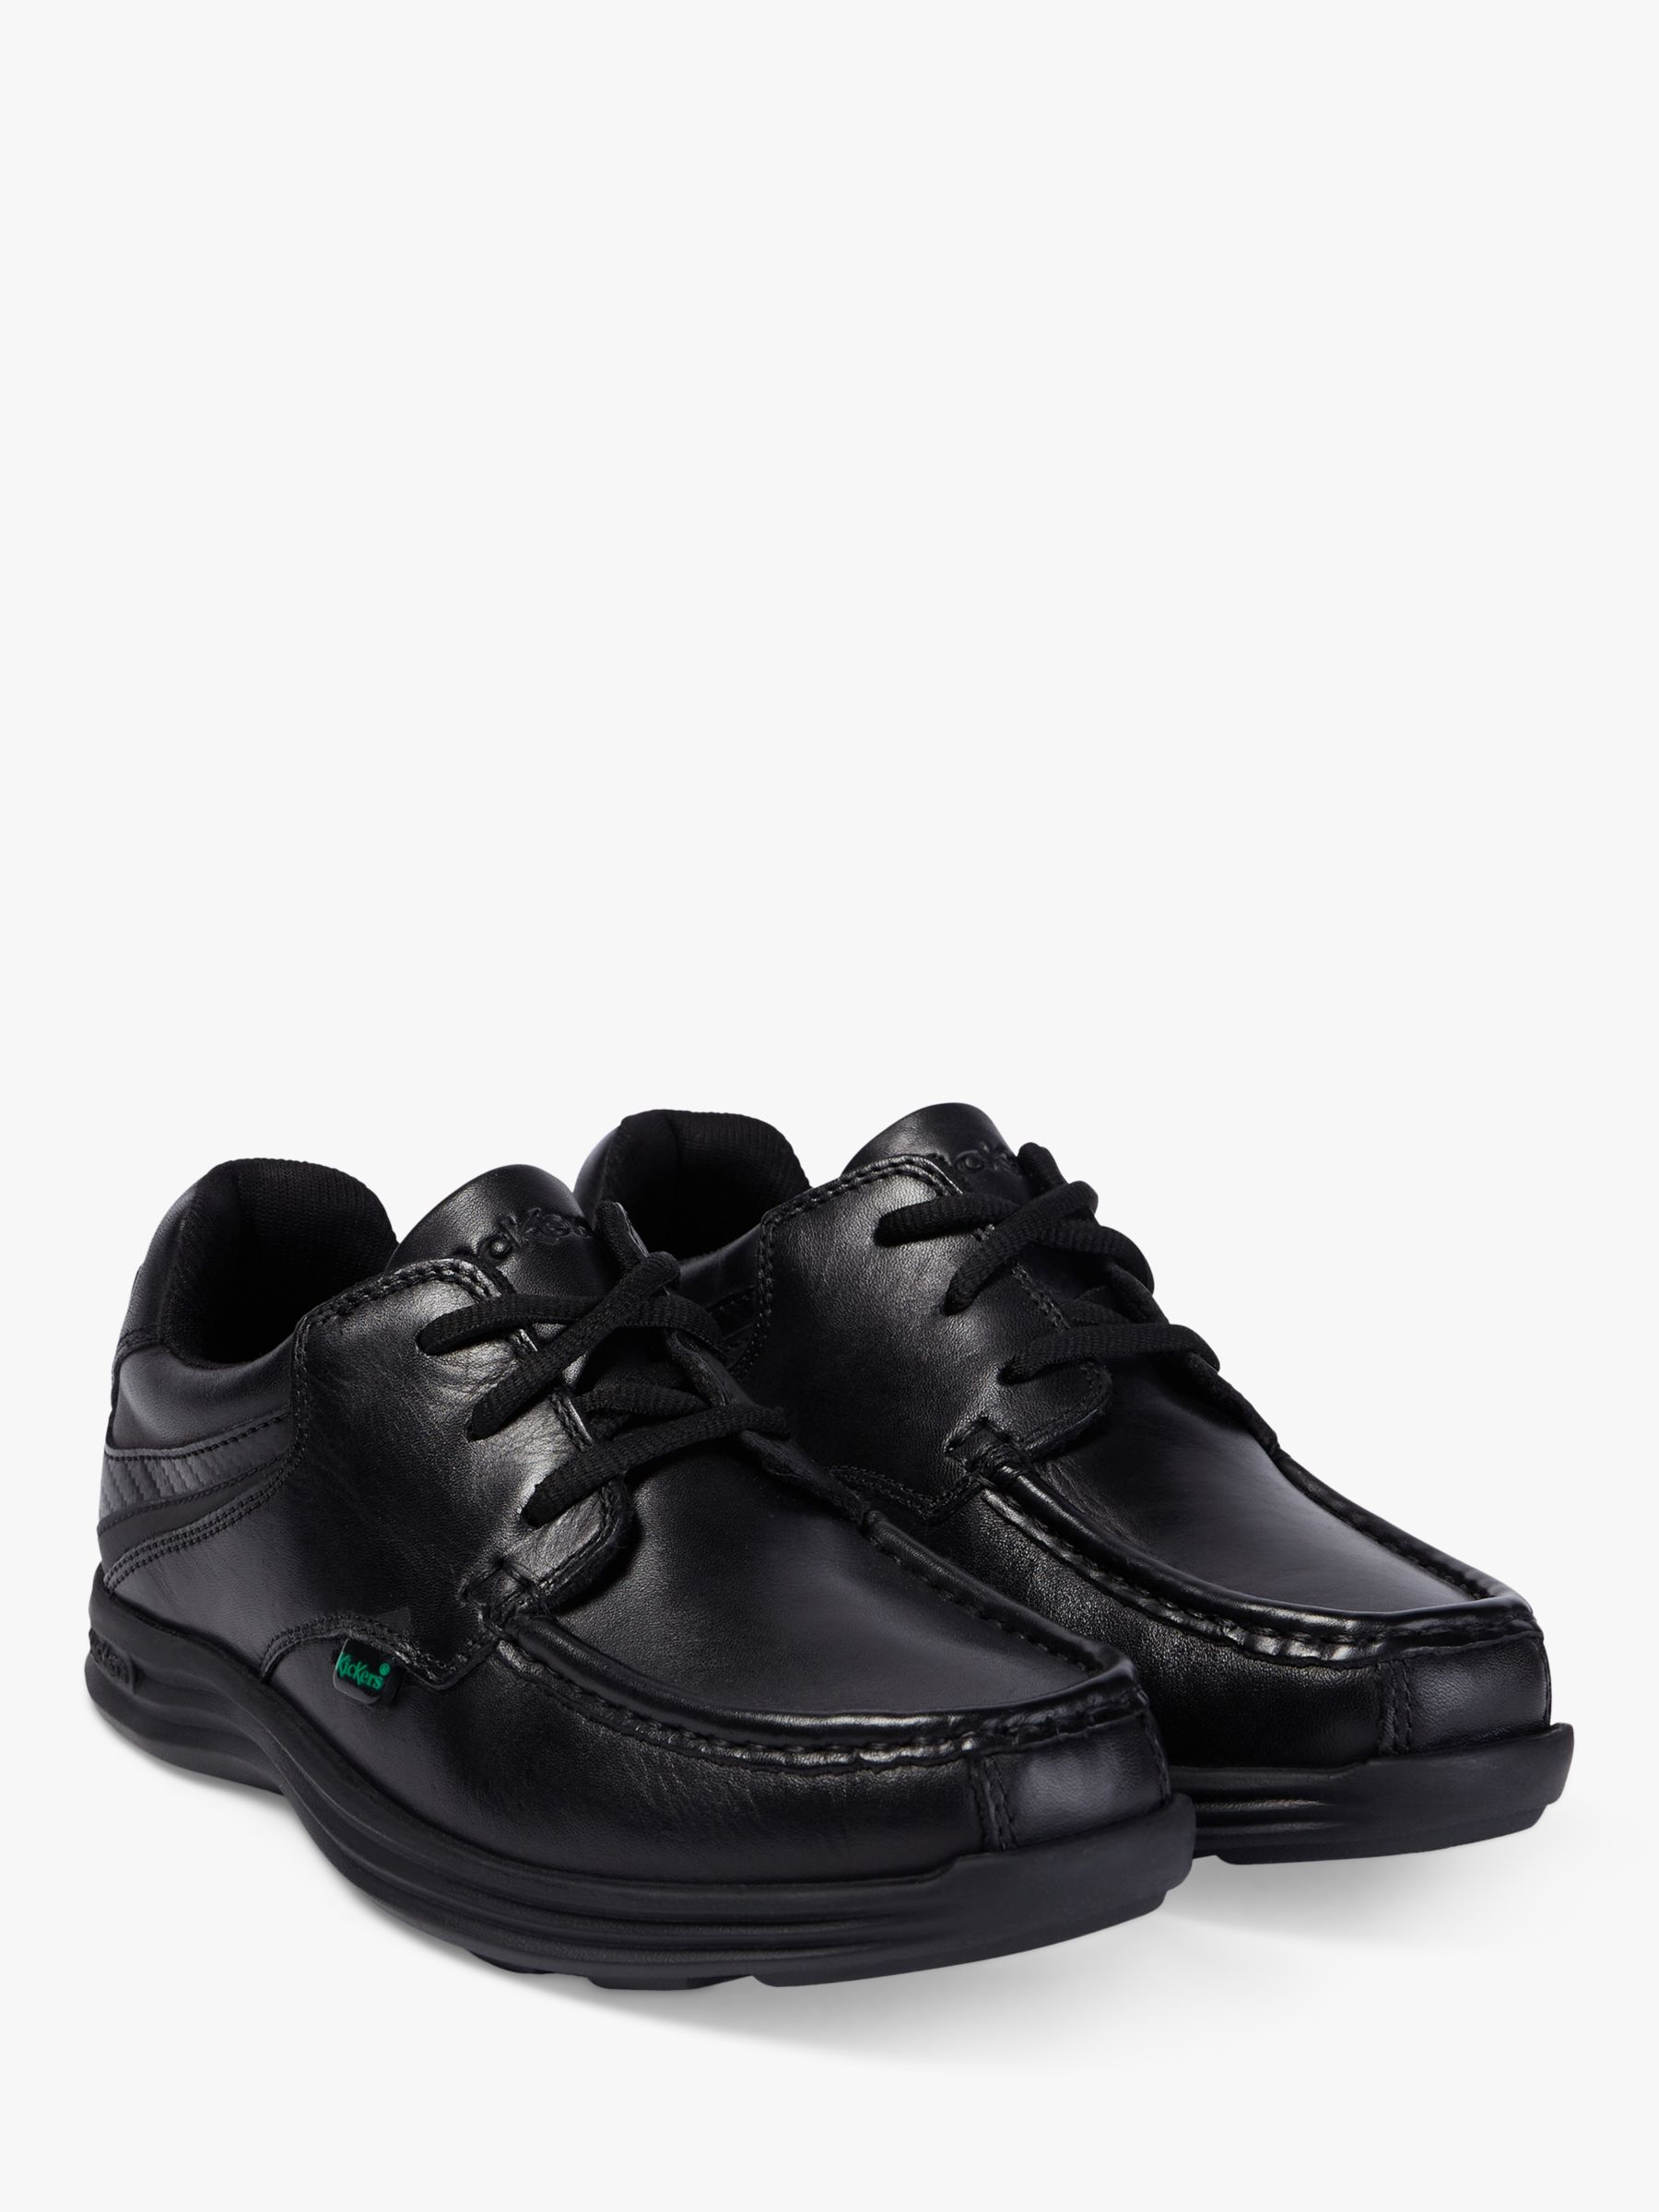 Buy Kickers Kids' Leather Reasan Laced Shoes, Black Online at johnlewis.com